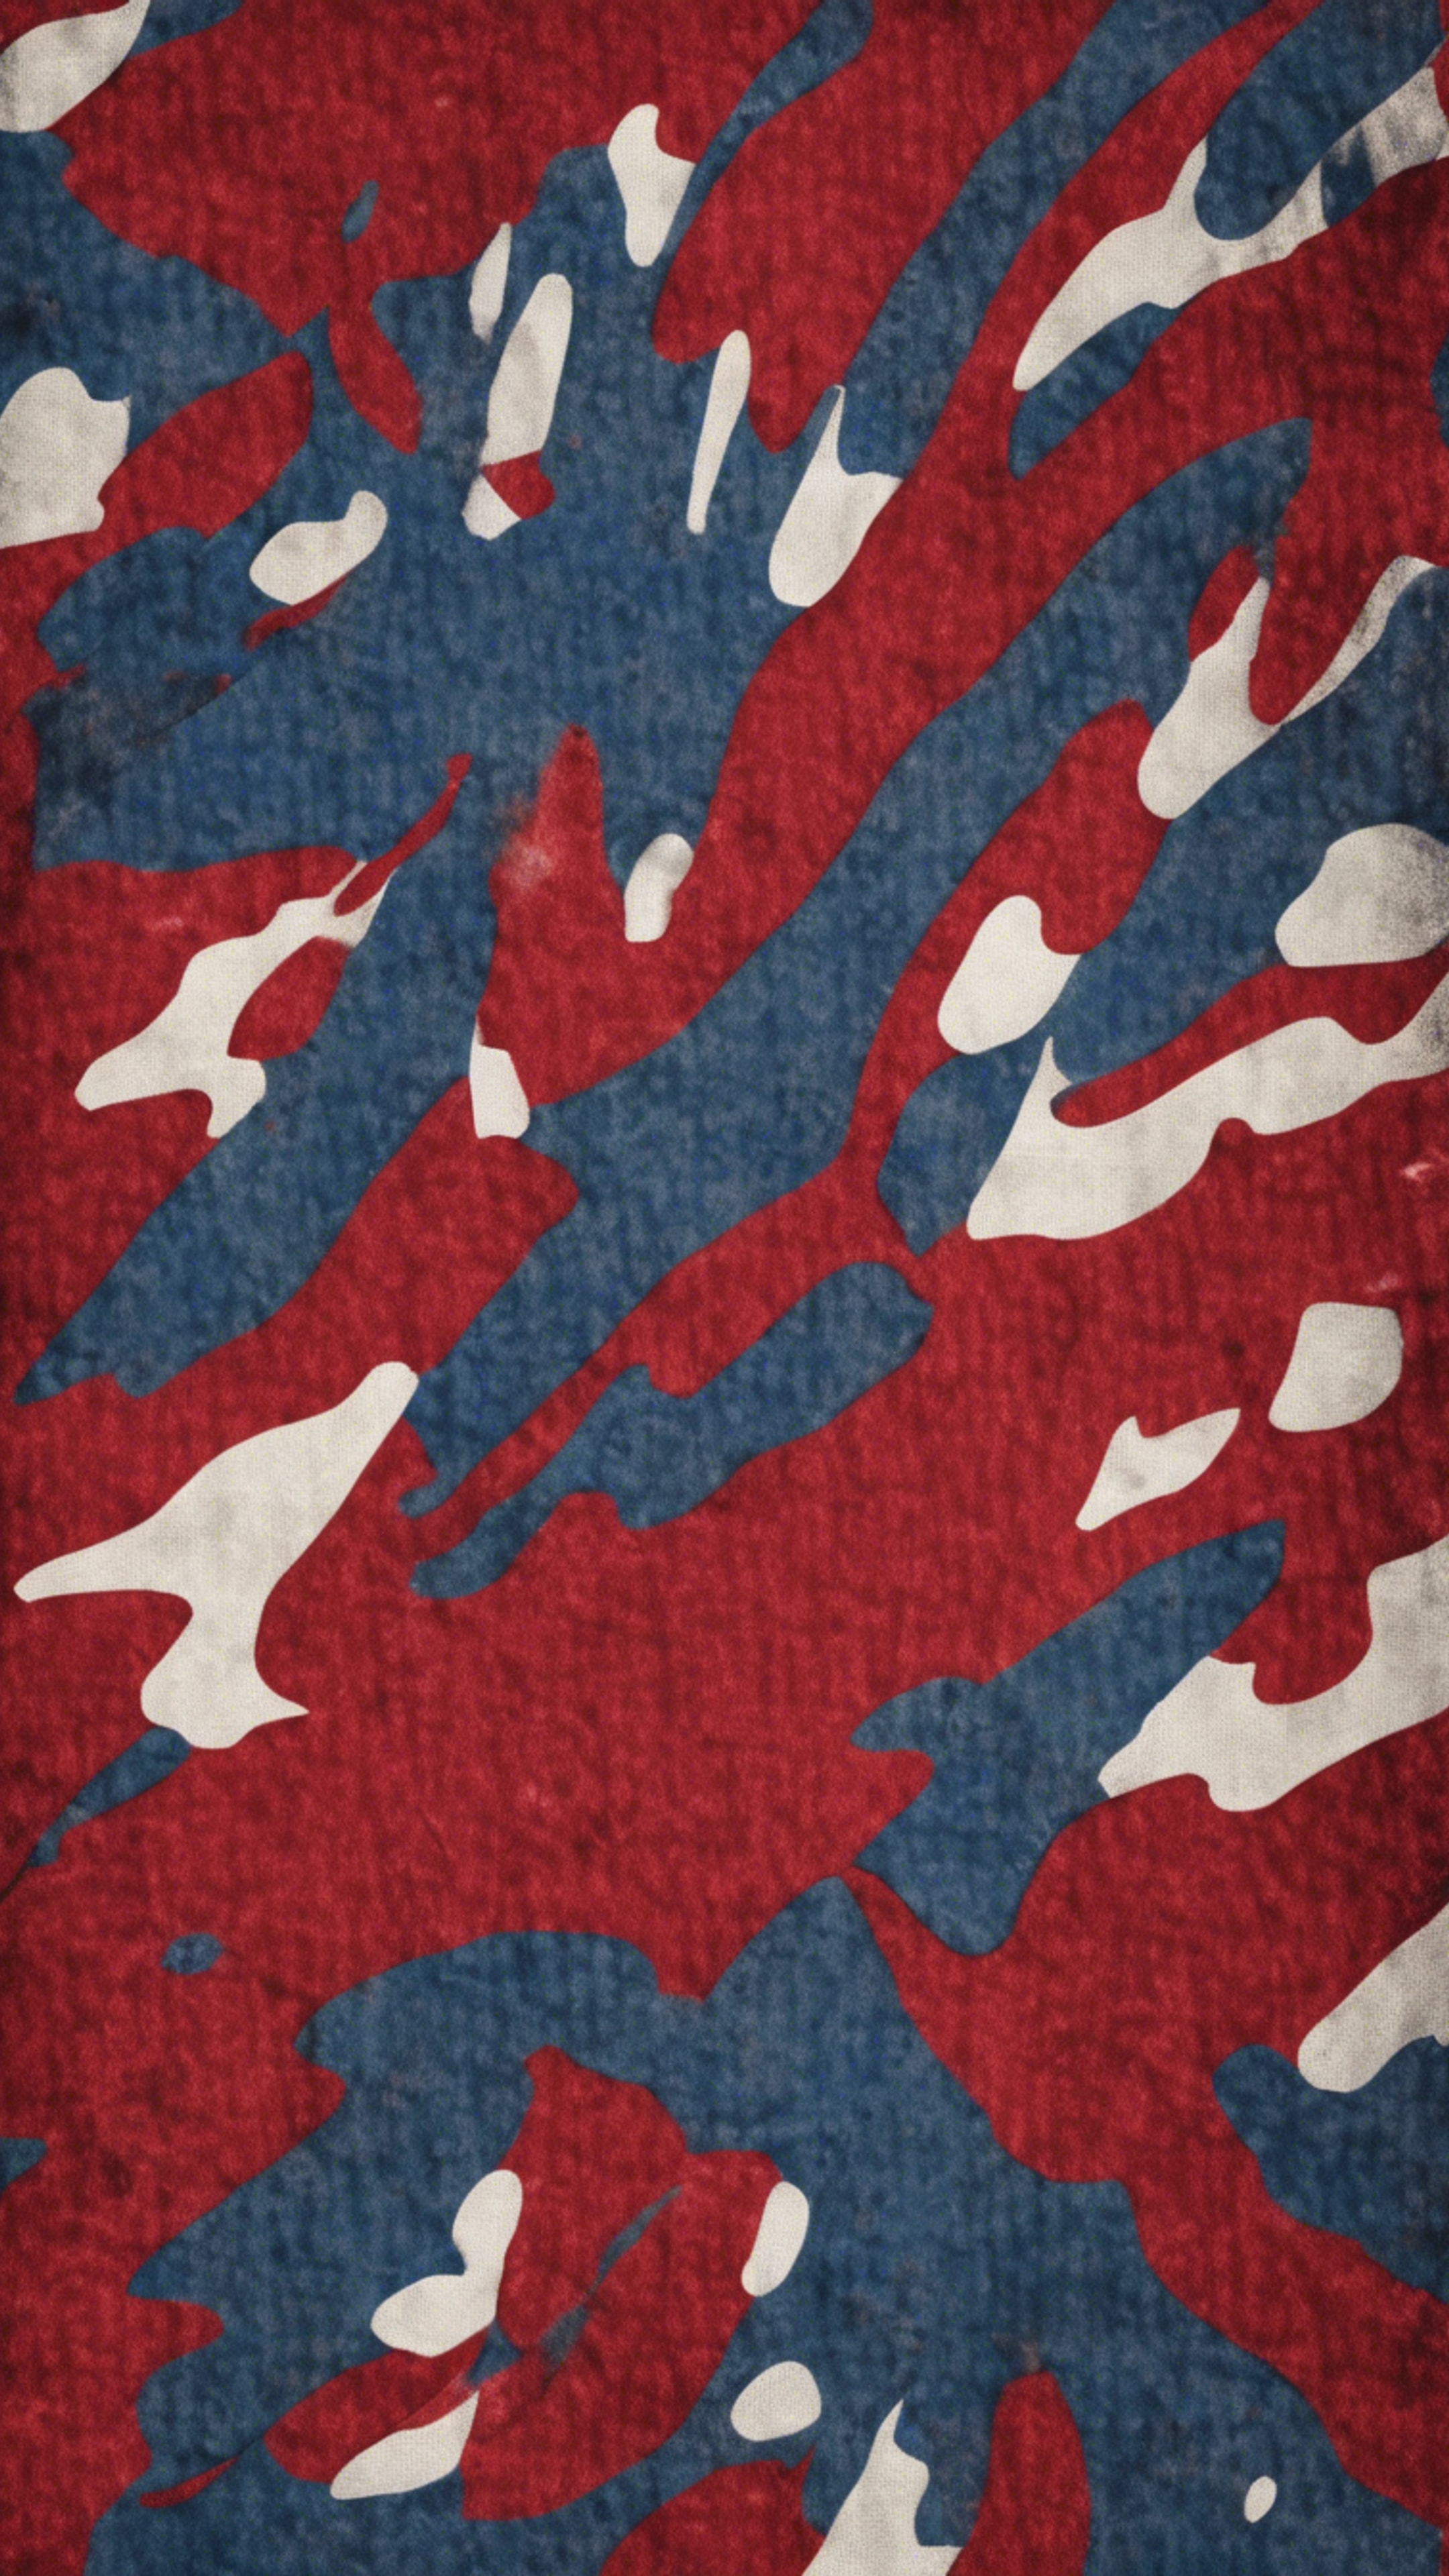 Red and blue camouflage pattern used in navy uniforms. Ταπετσαρία[01ccfb252ca748fab57f]